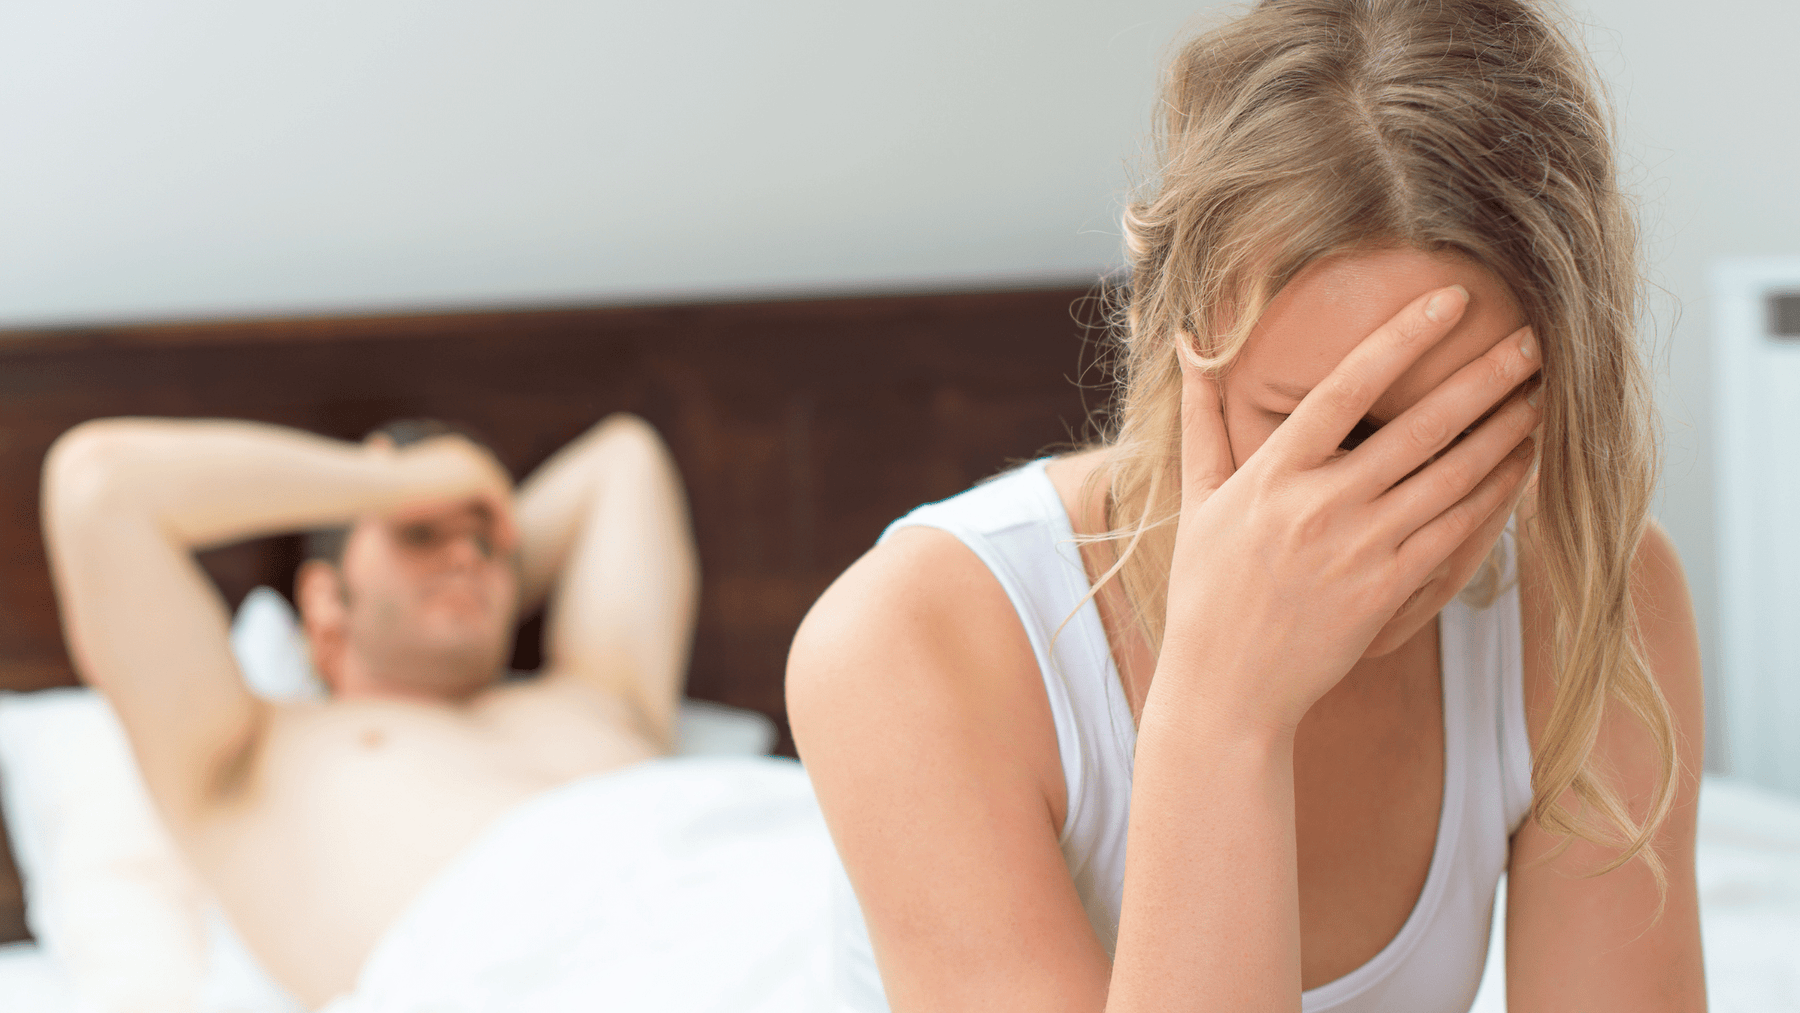 Causes of Low Sex Drive or Libido in Women